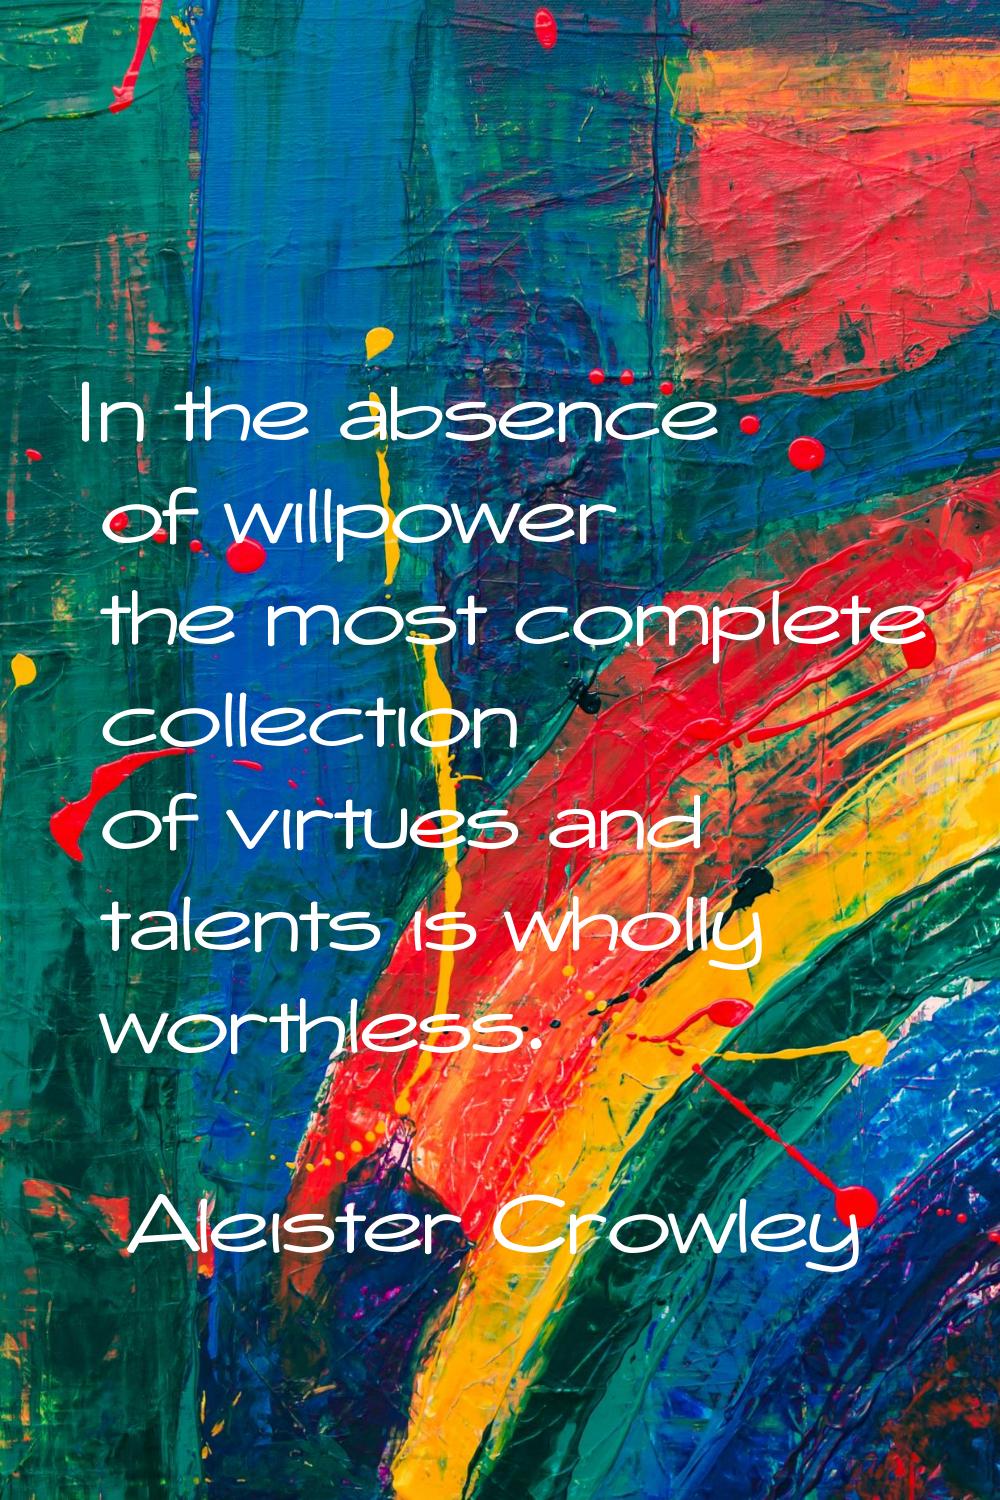 In the absence of willpower the most complete collection of virtues and talents is wholly worthless